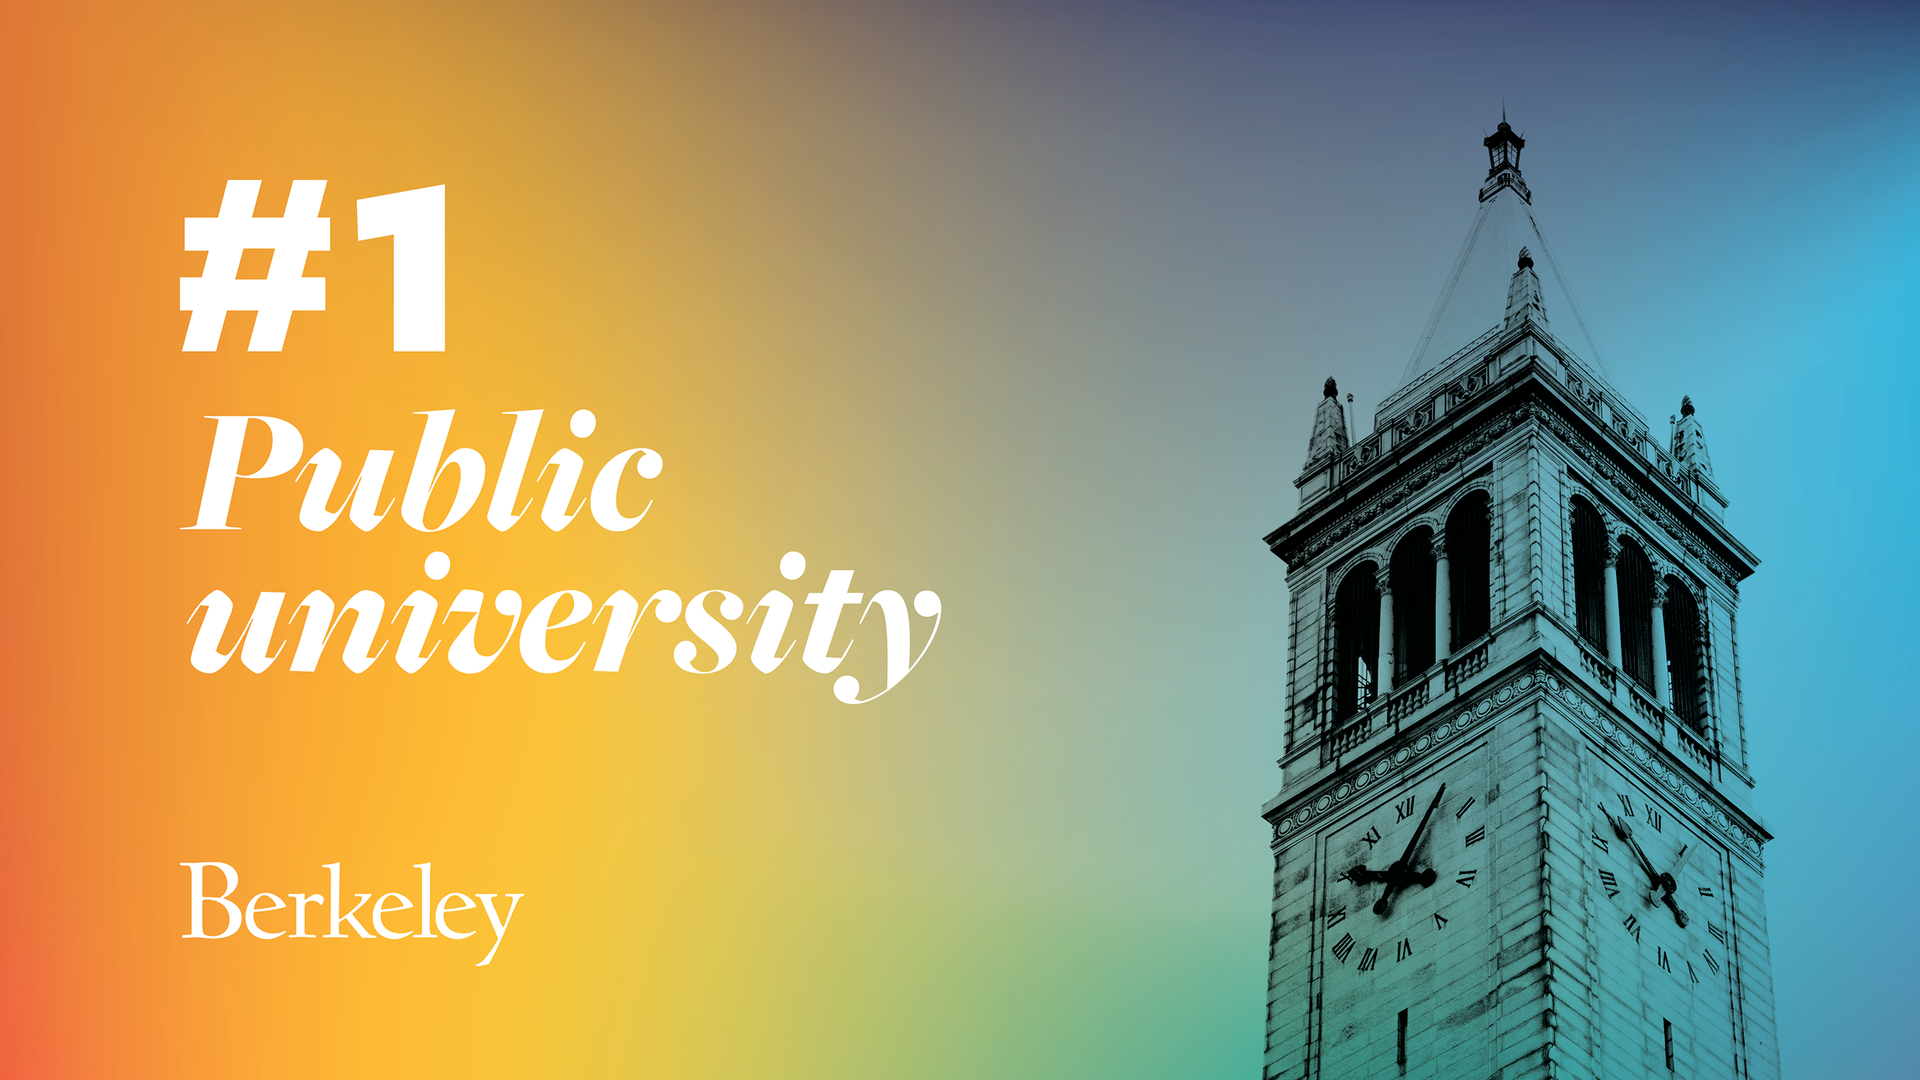 a photo of the top of a bell tower with a color gradient background that fades from blues to yellows. "#1 public university" and "Berkeley" is written on the left side.